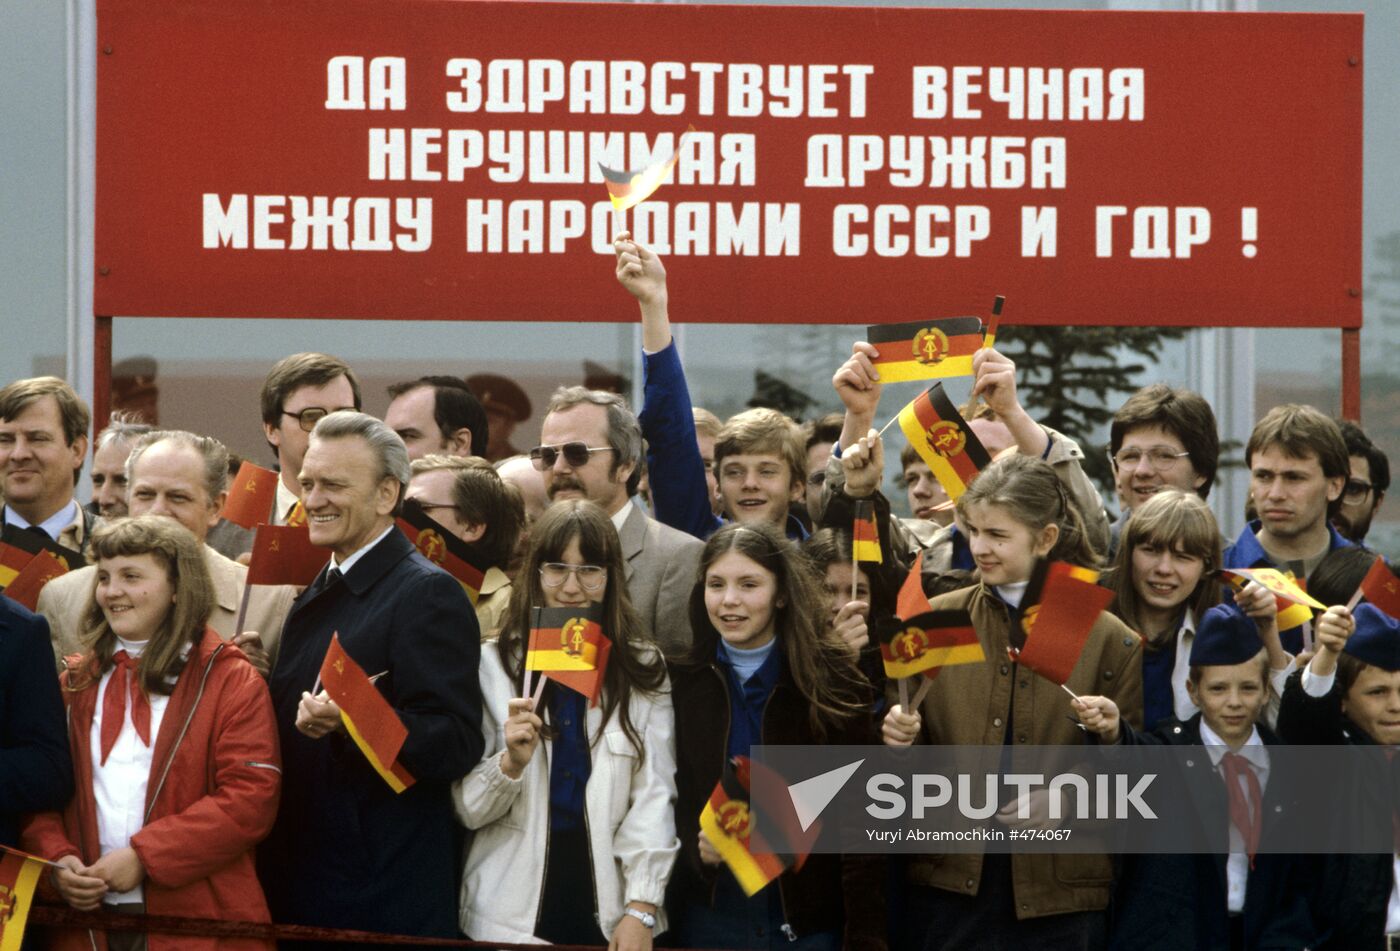 Moscow people greeted USSR and GDR leaders